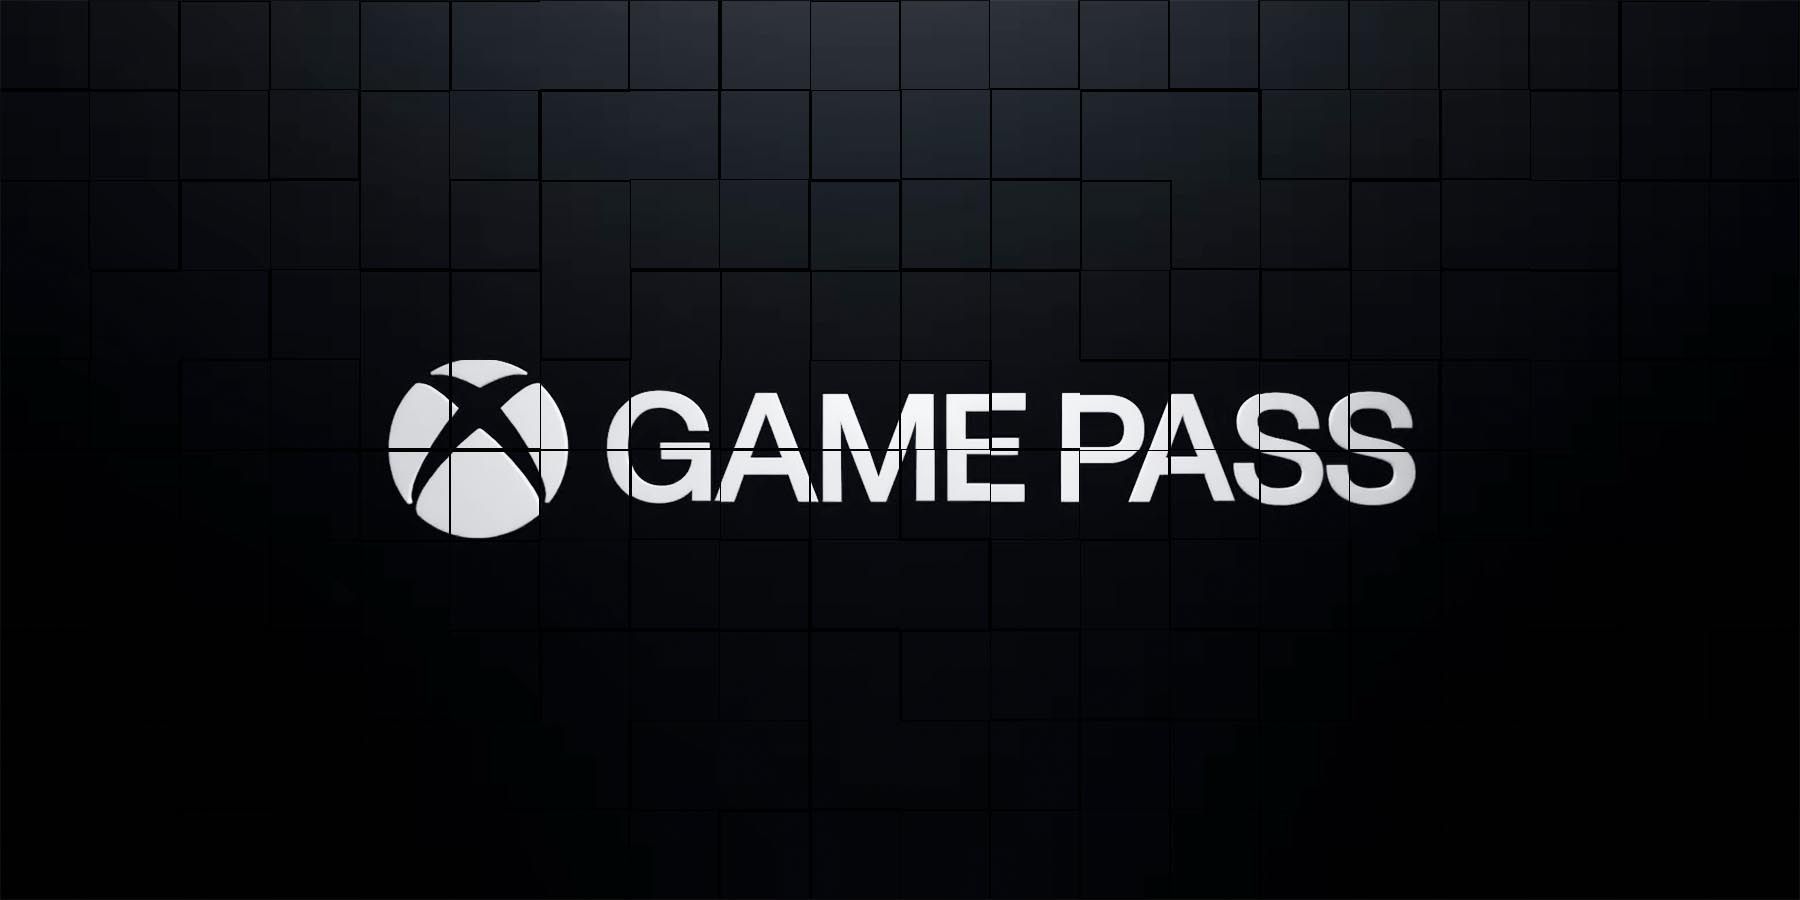 A new batch of Game Pass games has been announced including indie